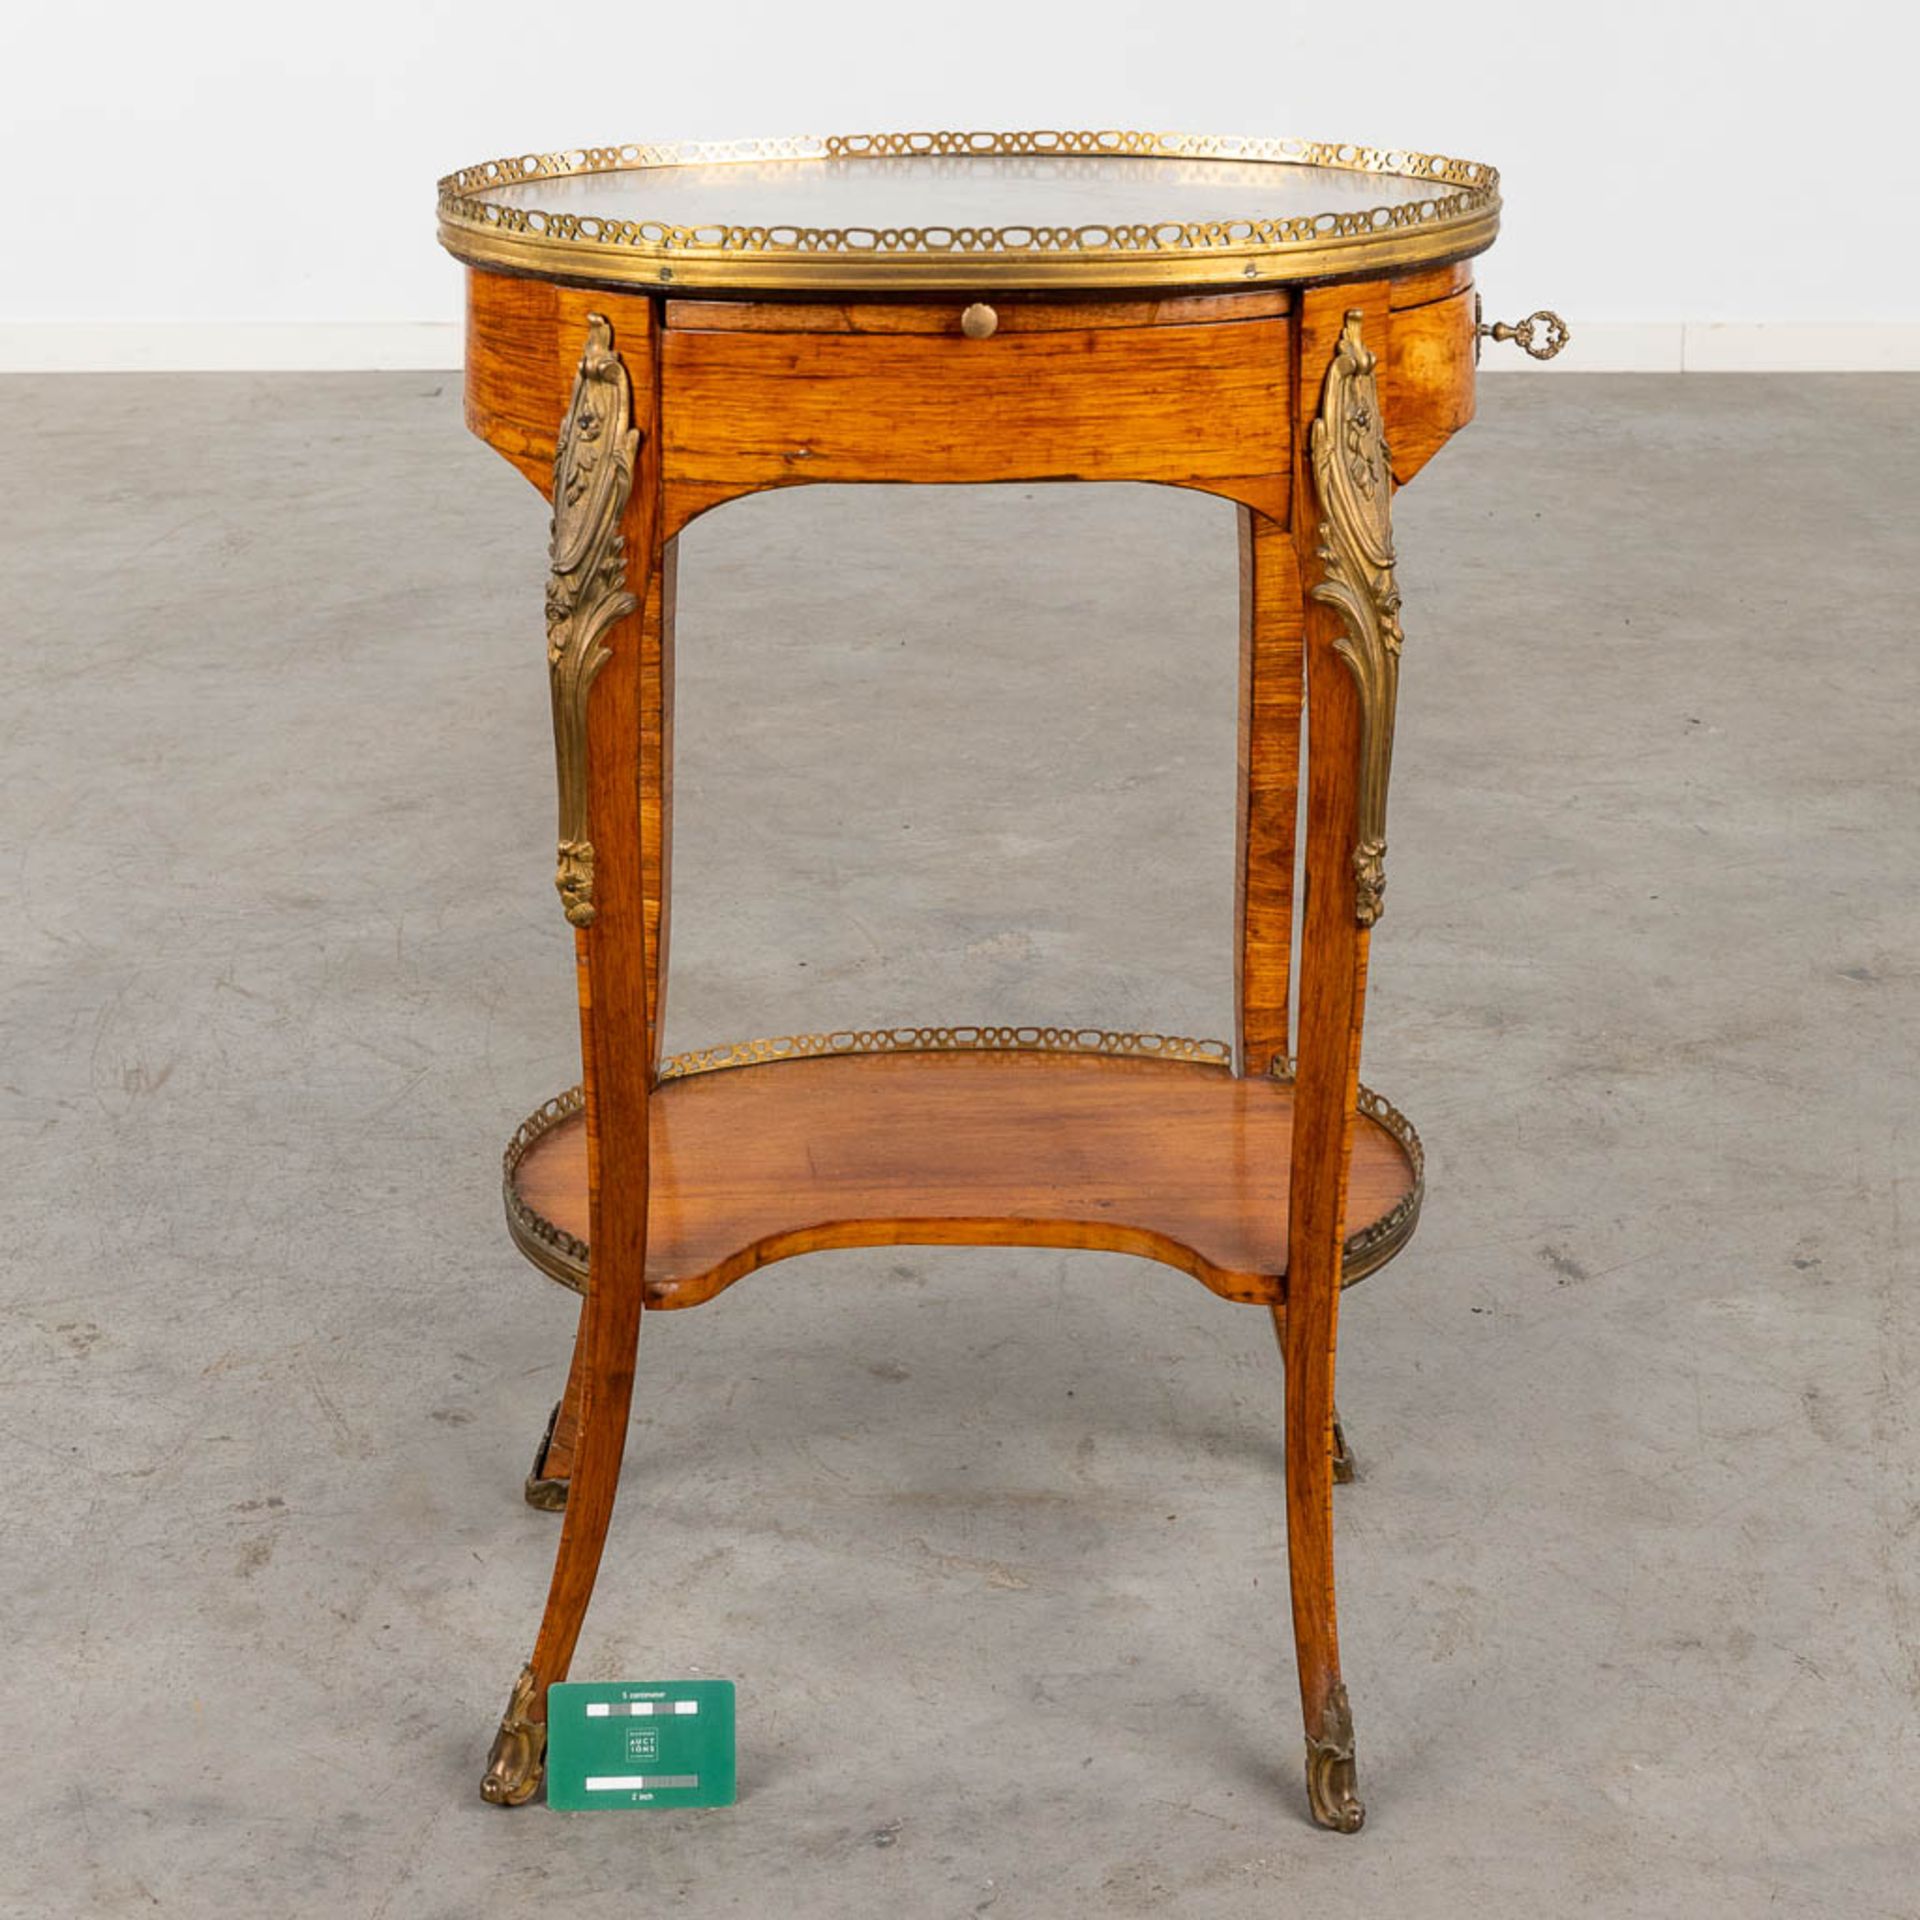 An antique side table, Louis XV, marquetry mounted with bronze and marble, 18th C. (D:38 x W:50 x H: - Image 2 of 14